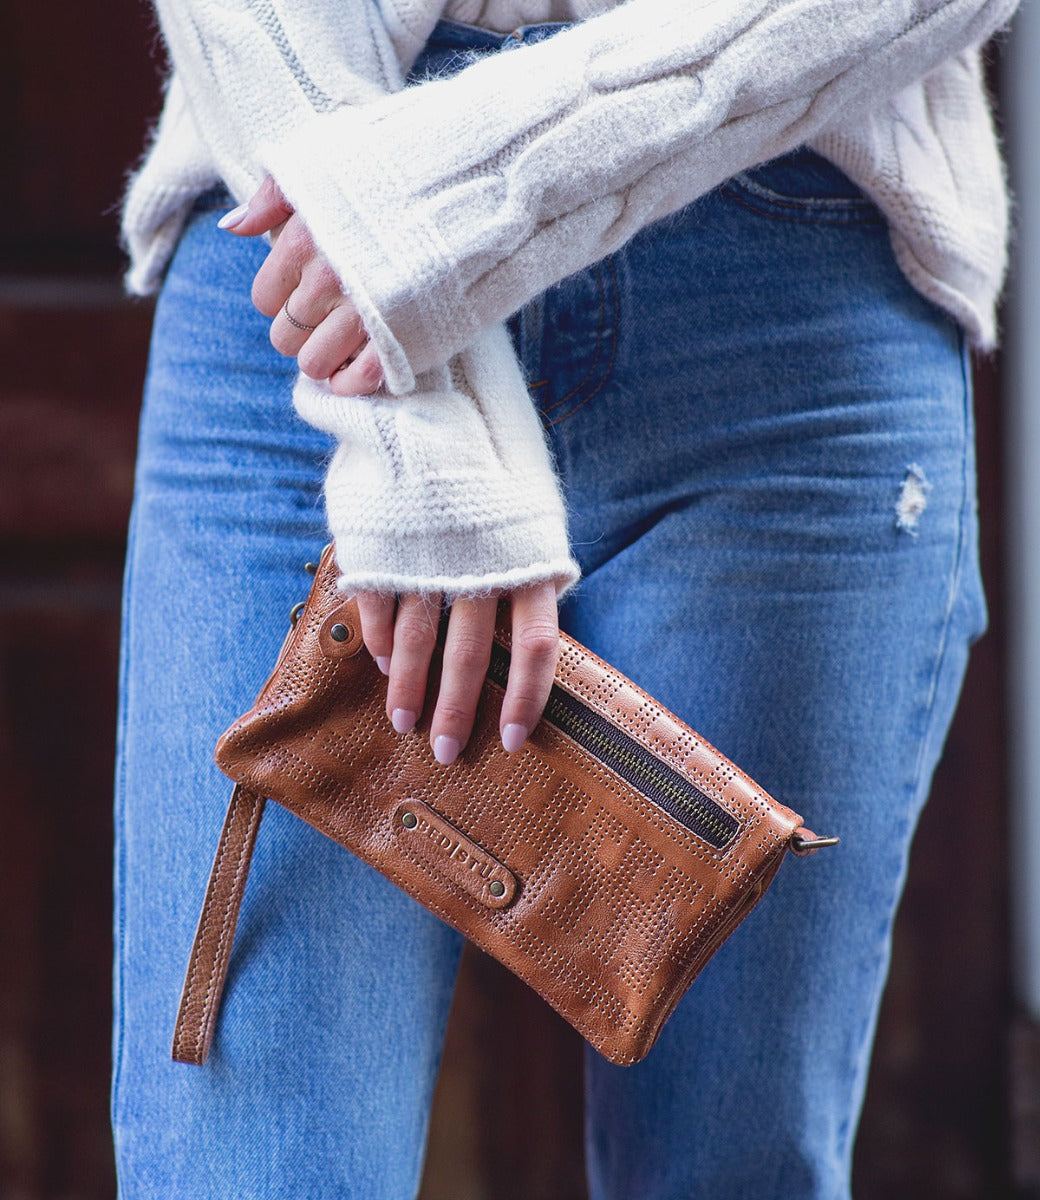 A woman wearing jeans and a sweater holding a Bed Stu Bayshore brown leather clutch.